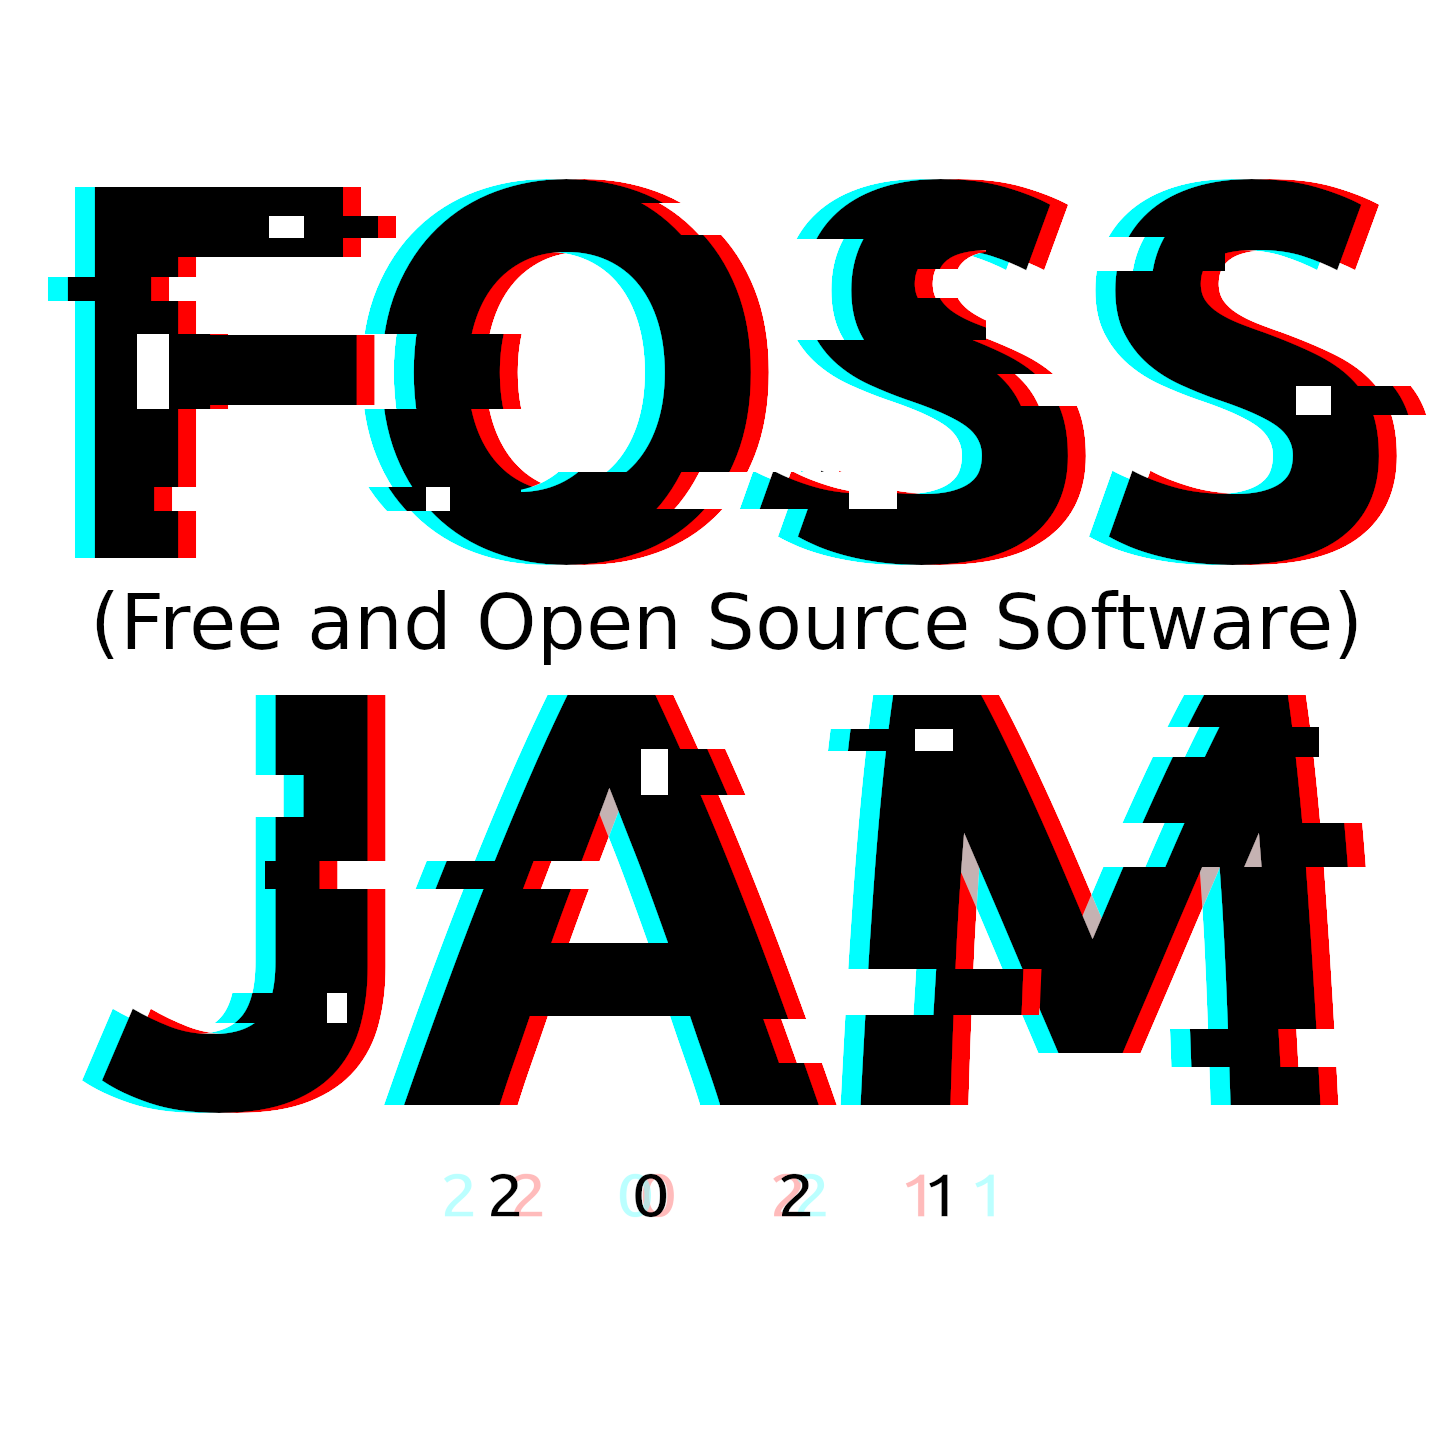 OS2G FOSS (Free and Open Source Software) Jam 2021